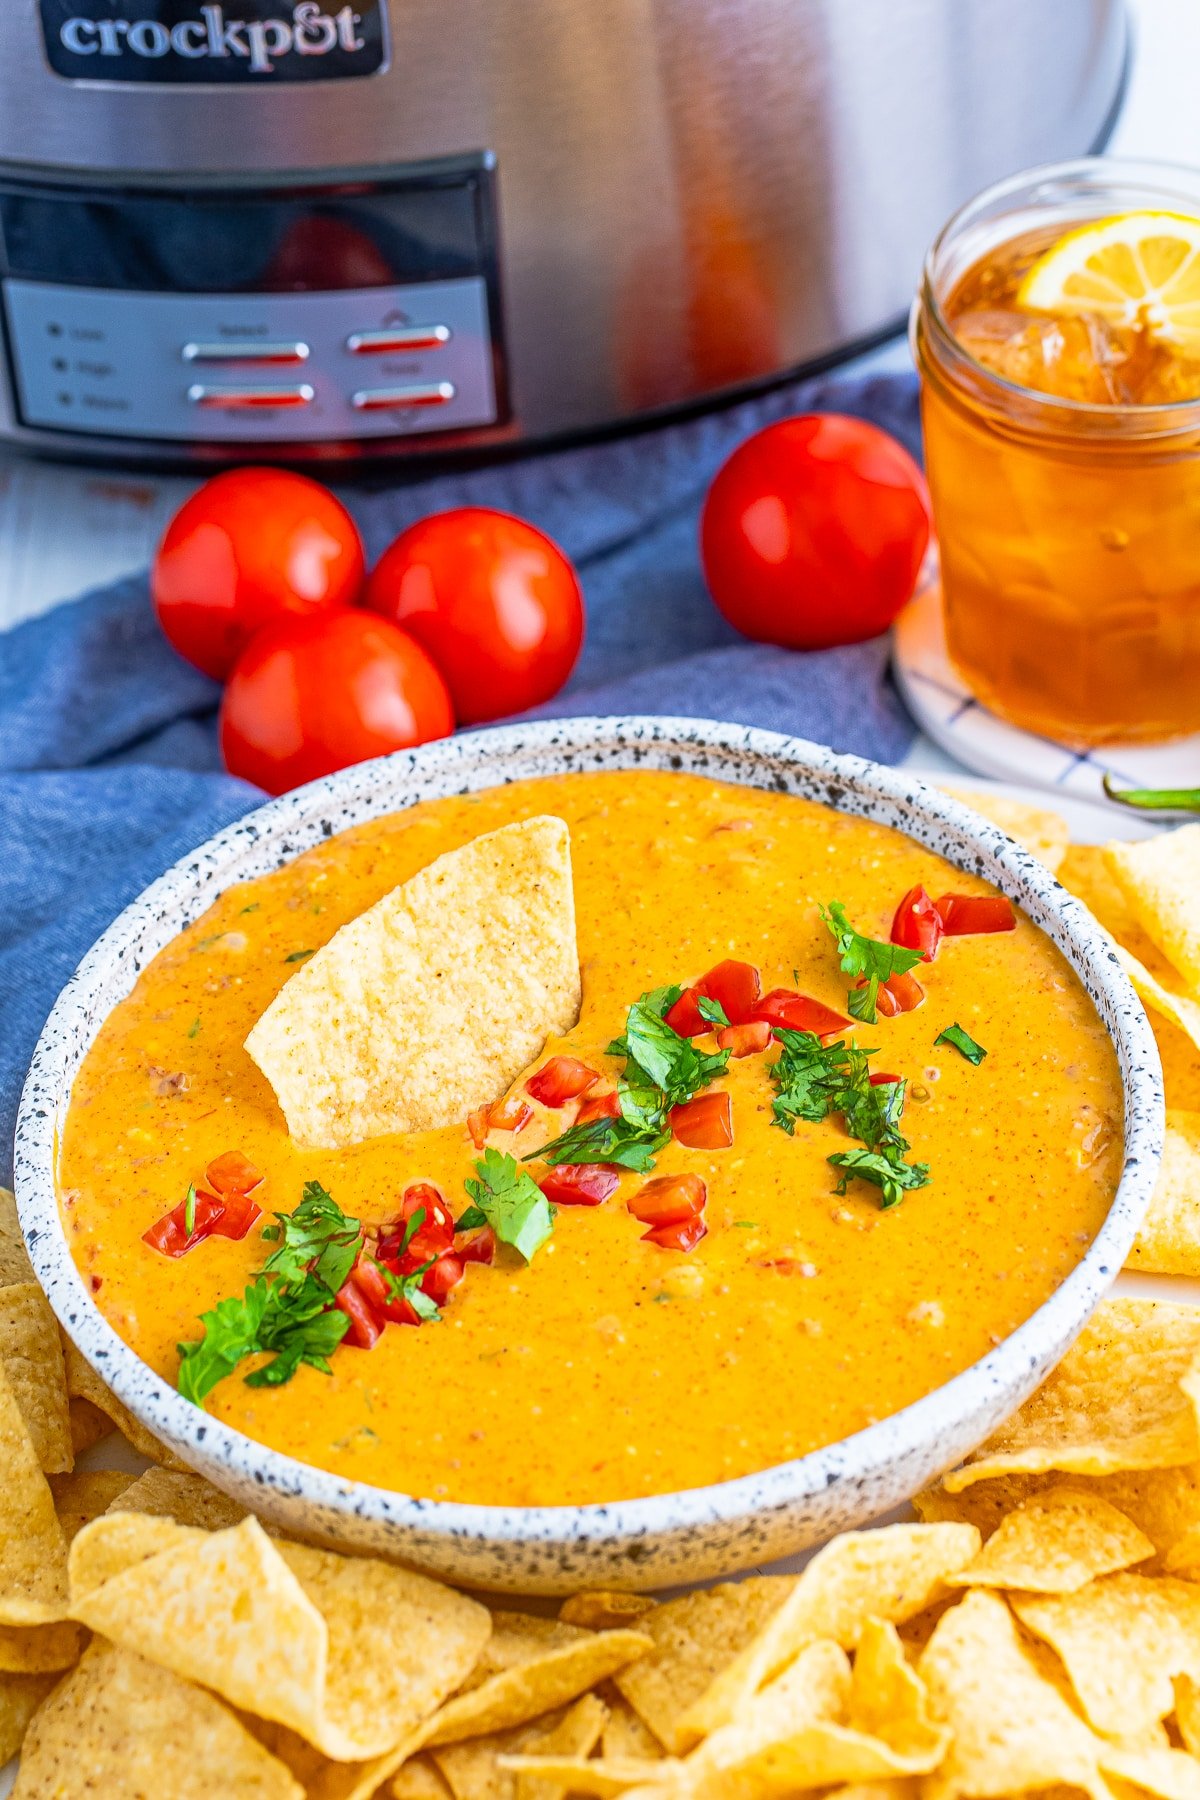 cilantro and tomatoes on top of Crock Pot Queso Dip served in a bowl with chips